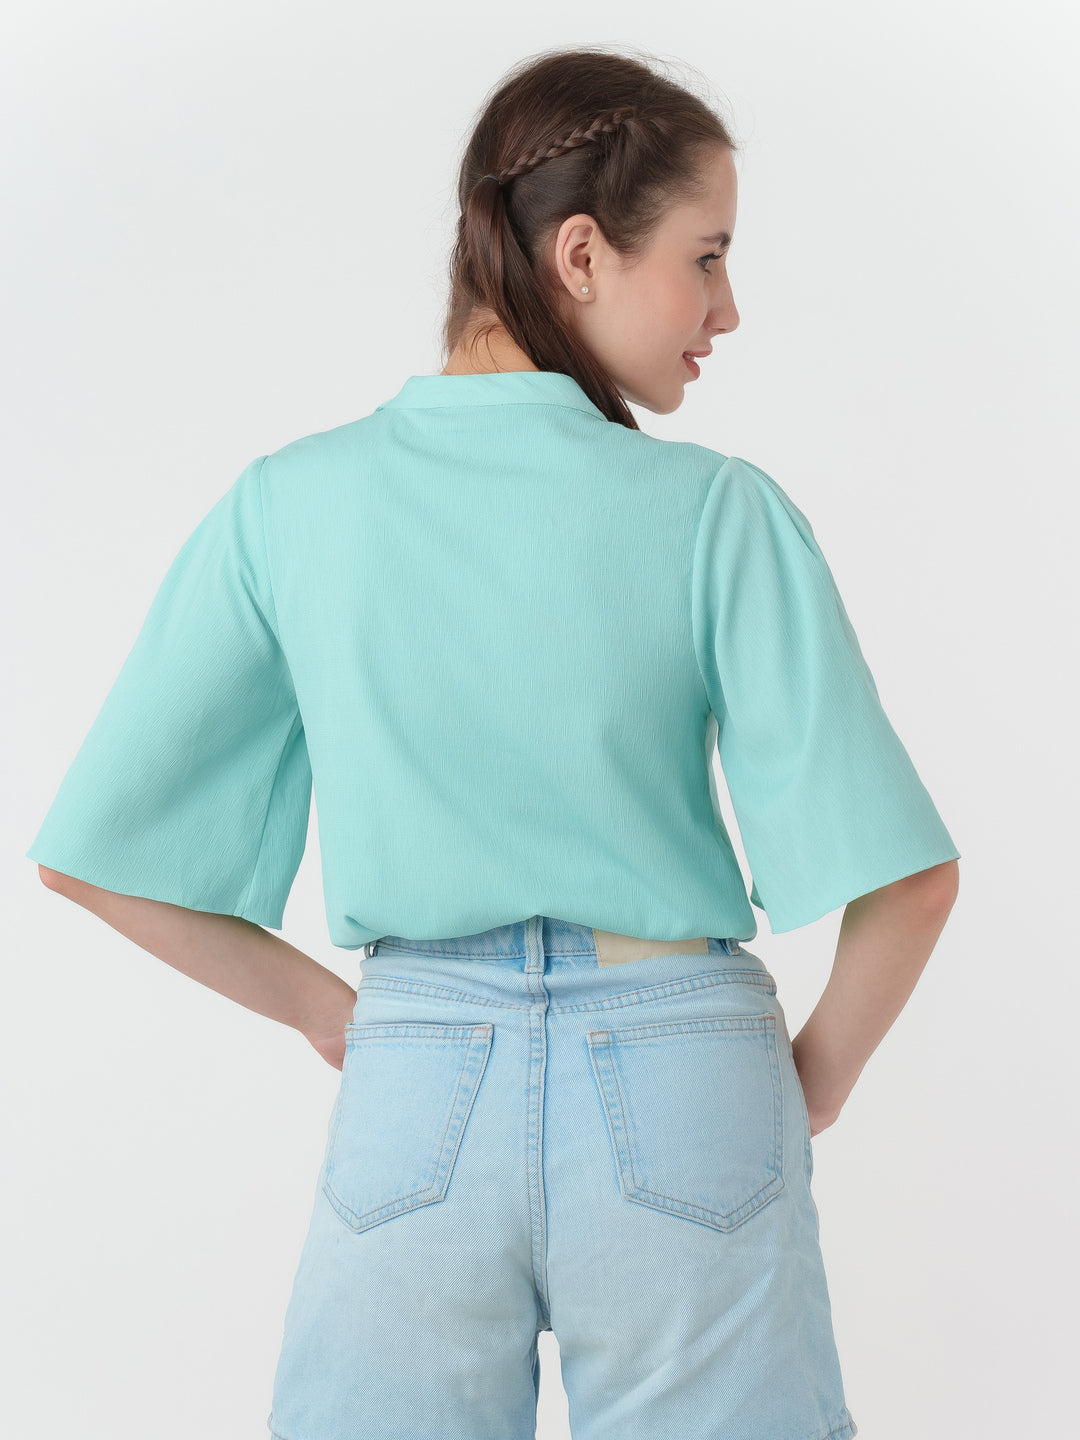 Turquoise_Solid_Regular_Top_4